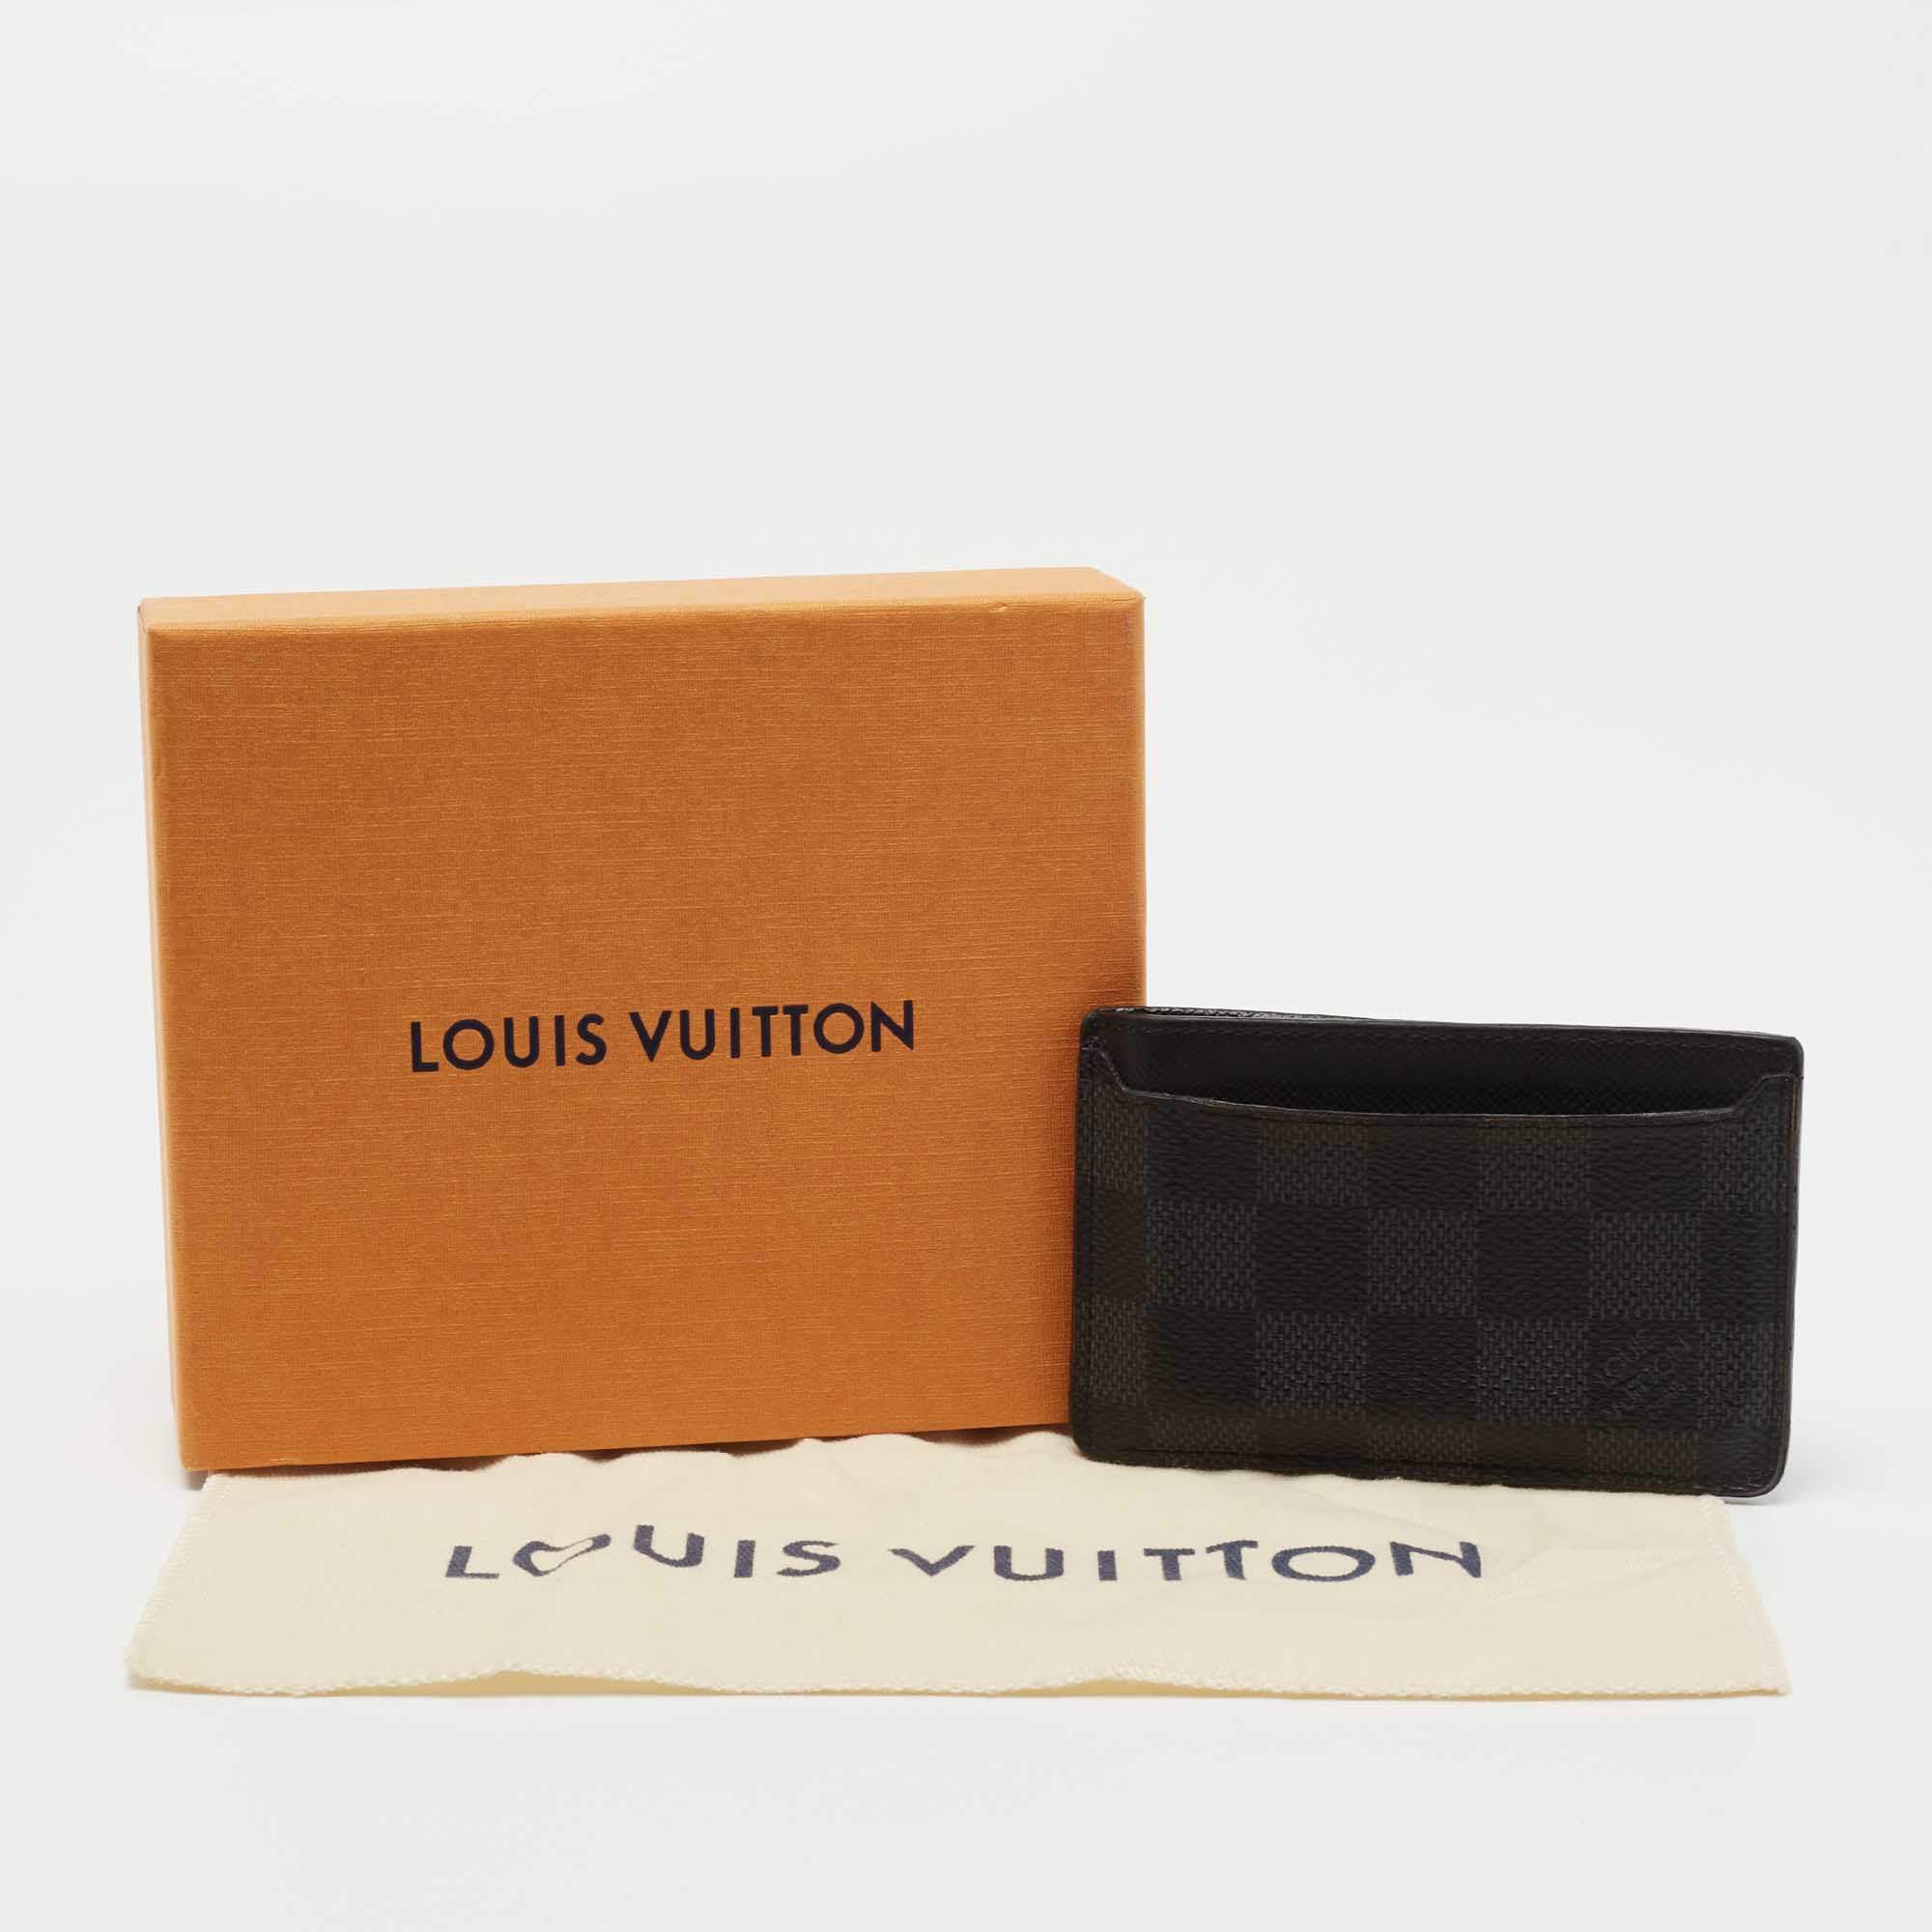 View 1 - Damier Graphite Canvas SMALL LEATHER GOODS Key and Card Holders  Neo Porte Cartes, Louis Vuitton ®